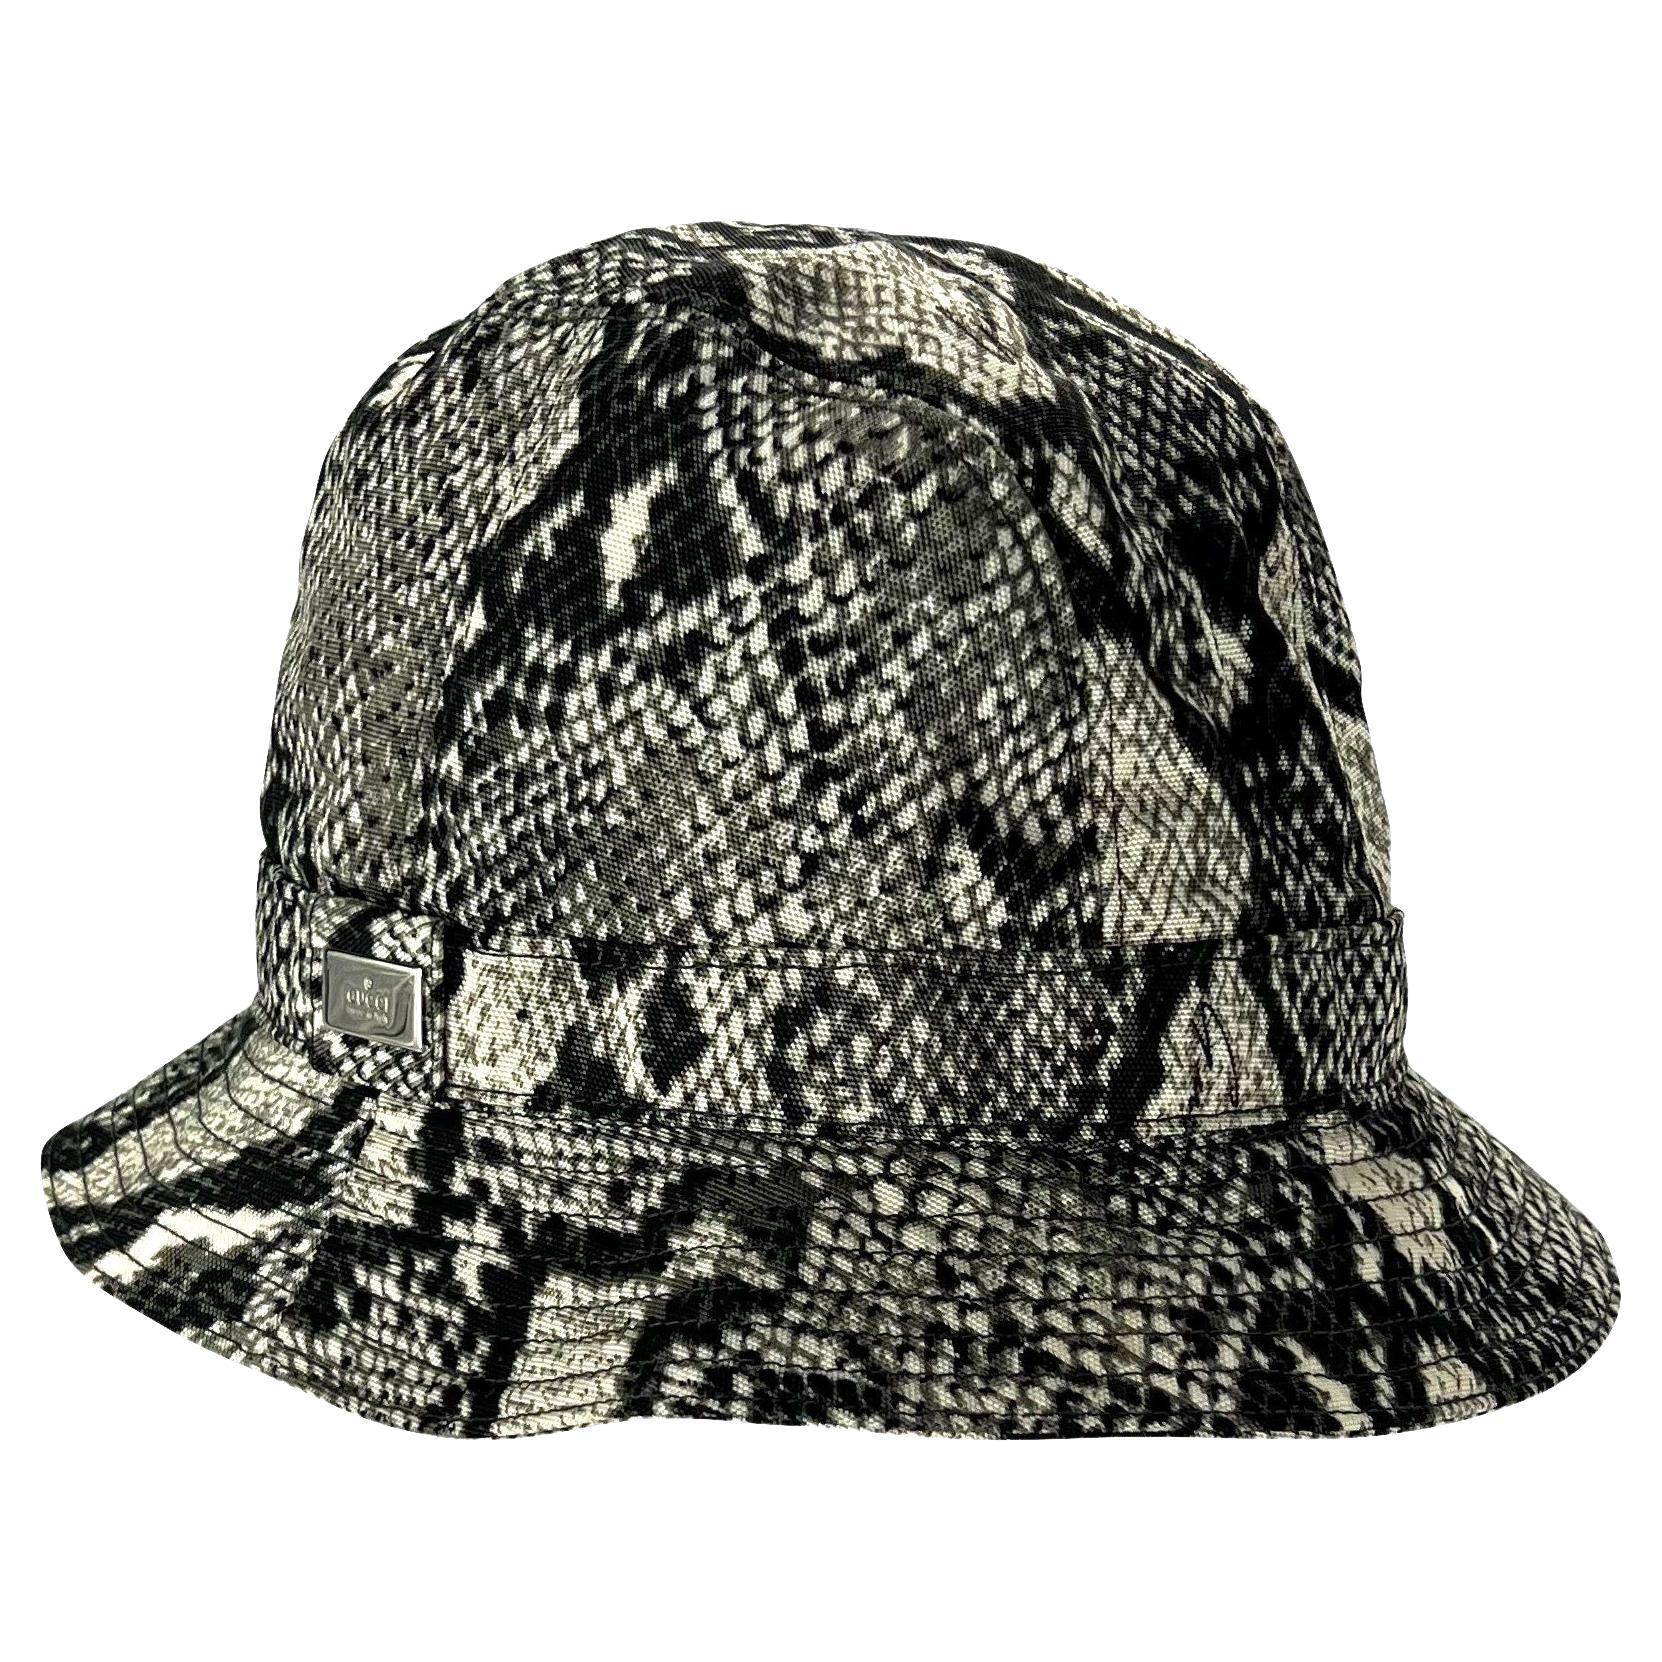 TheRealList presents: a fabulous rare grey snake print Gucci bucket hat, designed by Tom Ford. From the Spring/Summer 2000 collection, the same snakeskin print was heavily used on the season's runway and ad campaign. This snakeskin print hat is made